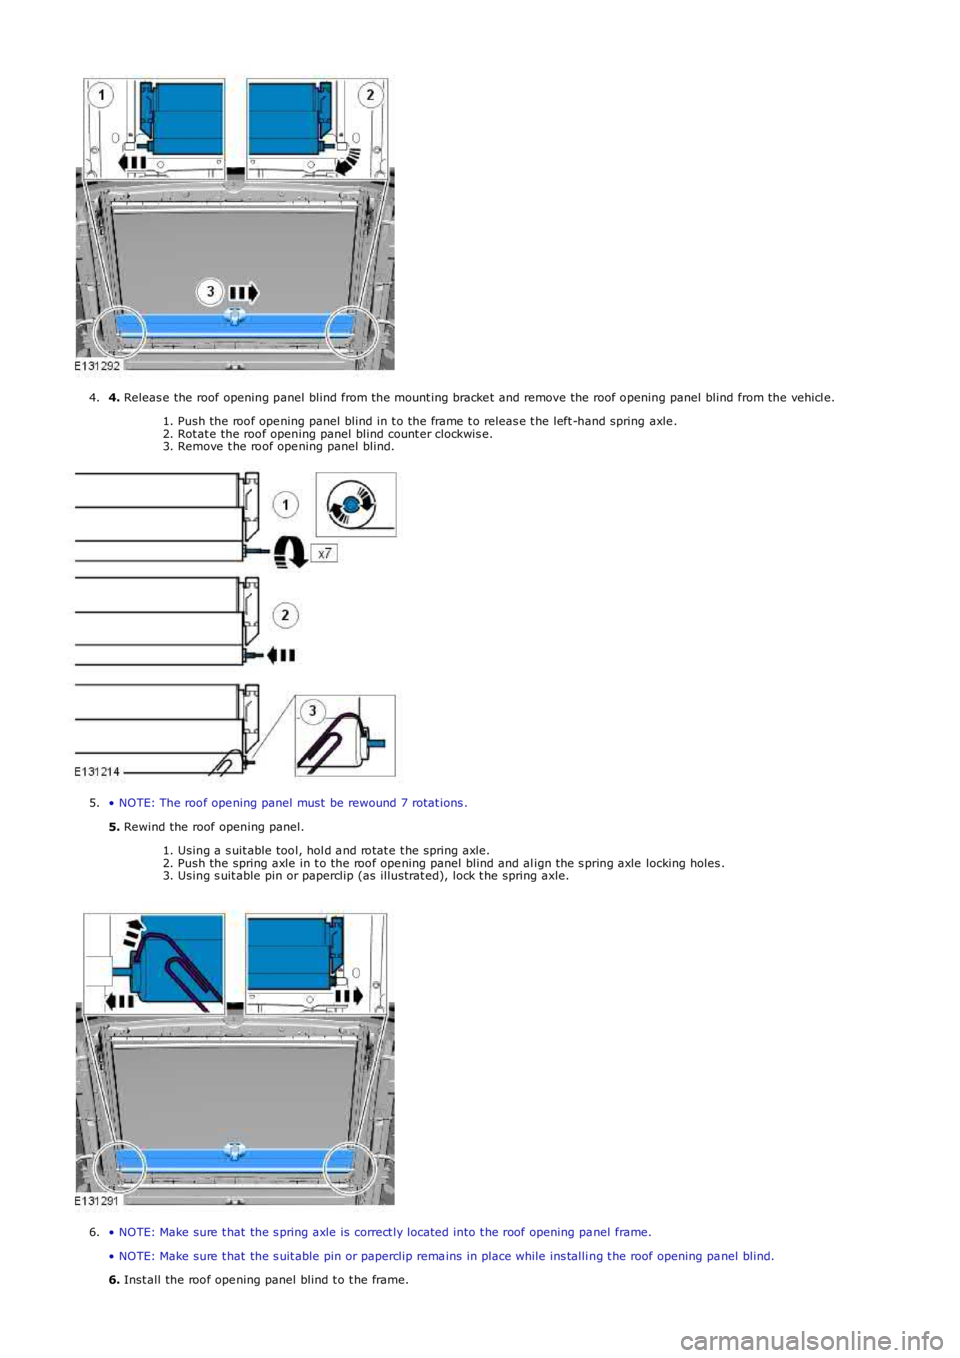 LAND ROVER FRELANDER 2 2006  Repair Manual 4. Releas e the roof opening panel blind from the mount ing bracke t and remove the roof opening panel blind from the vehicl e.
1. Push the roof ope ning panel blind in t o the frame  t o releas e t h